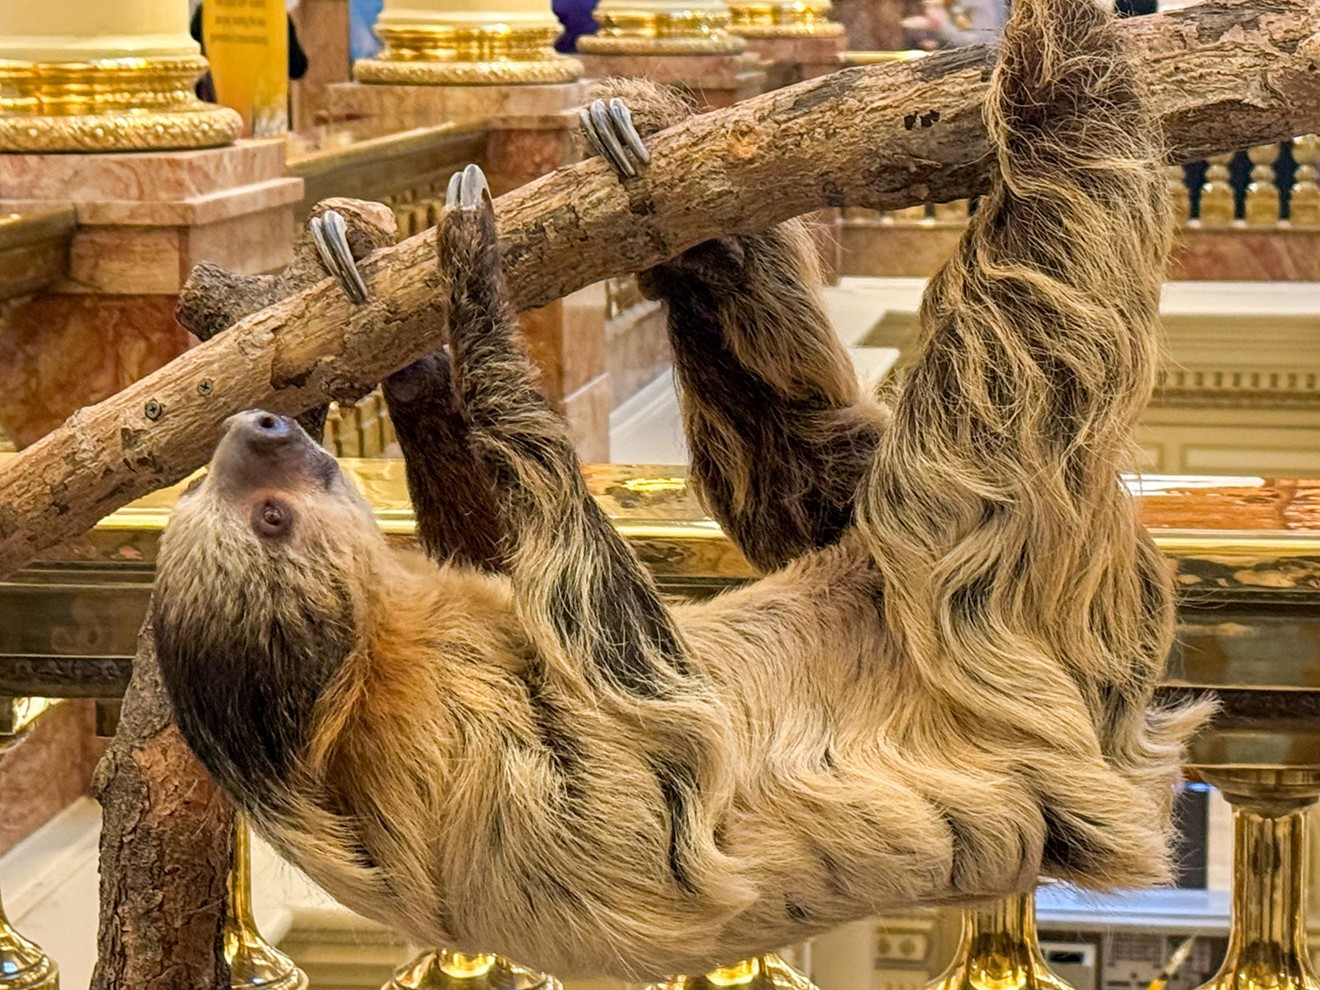 Wookiee the Linne's two-toed sloth lounging at the Capitol on March 1.